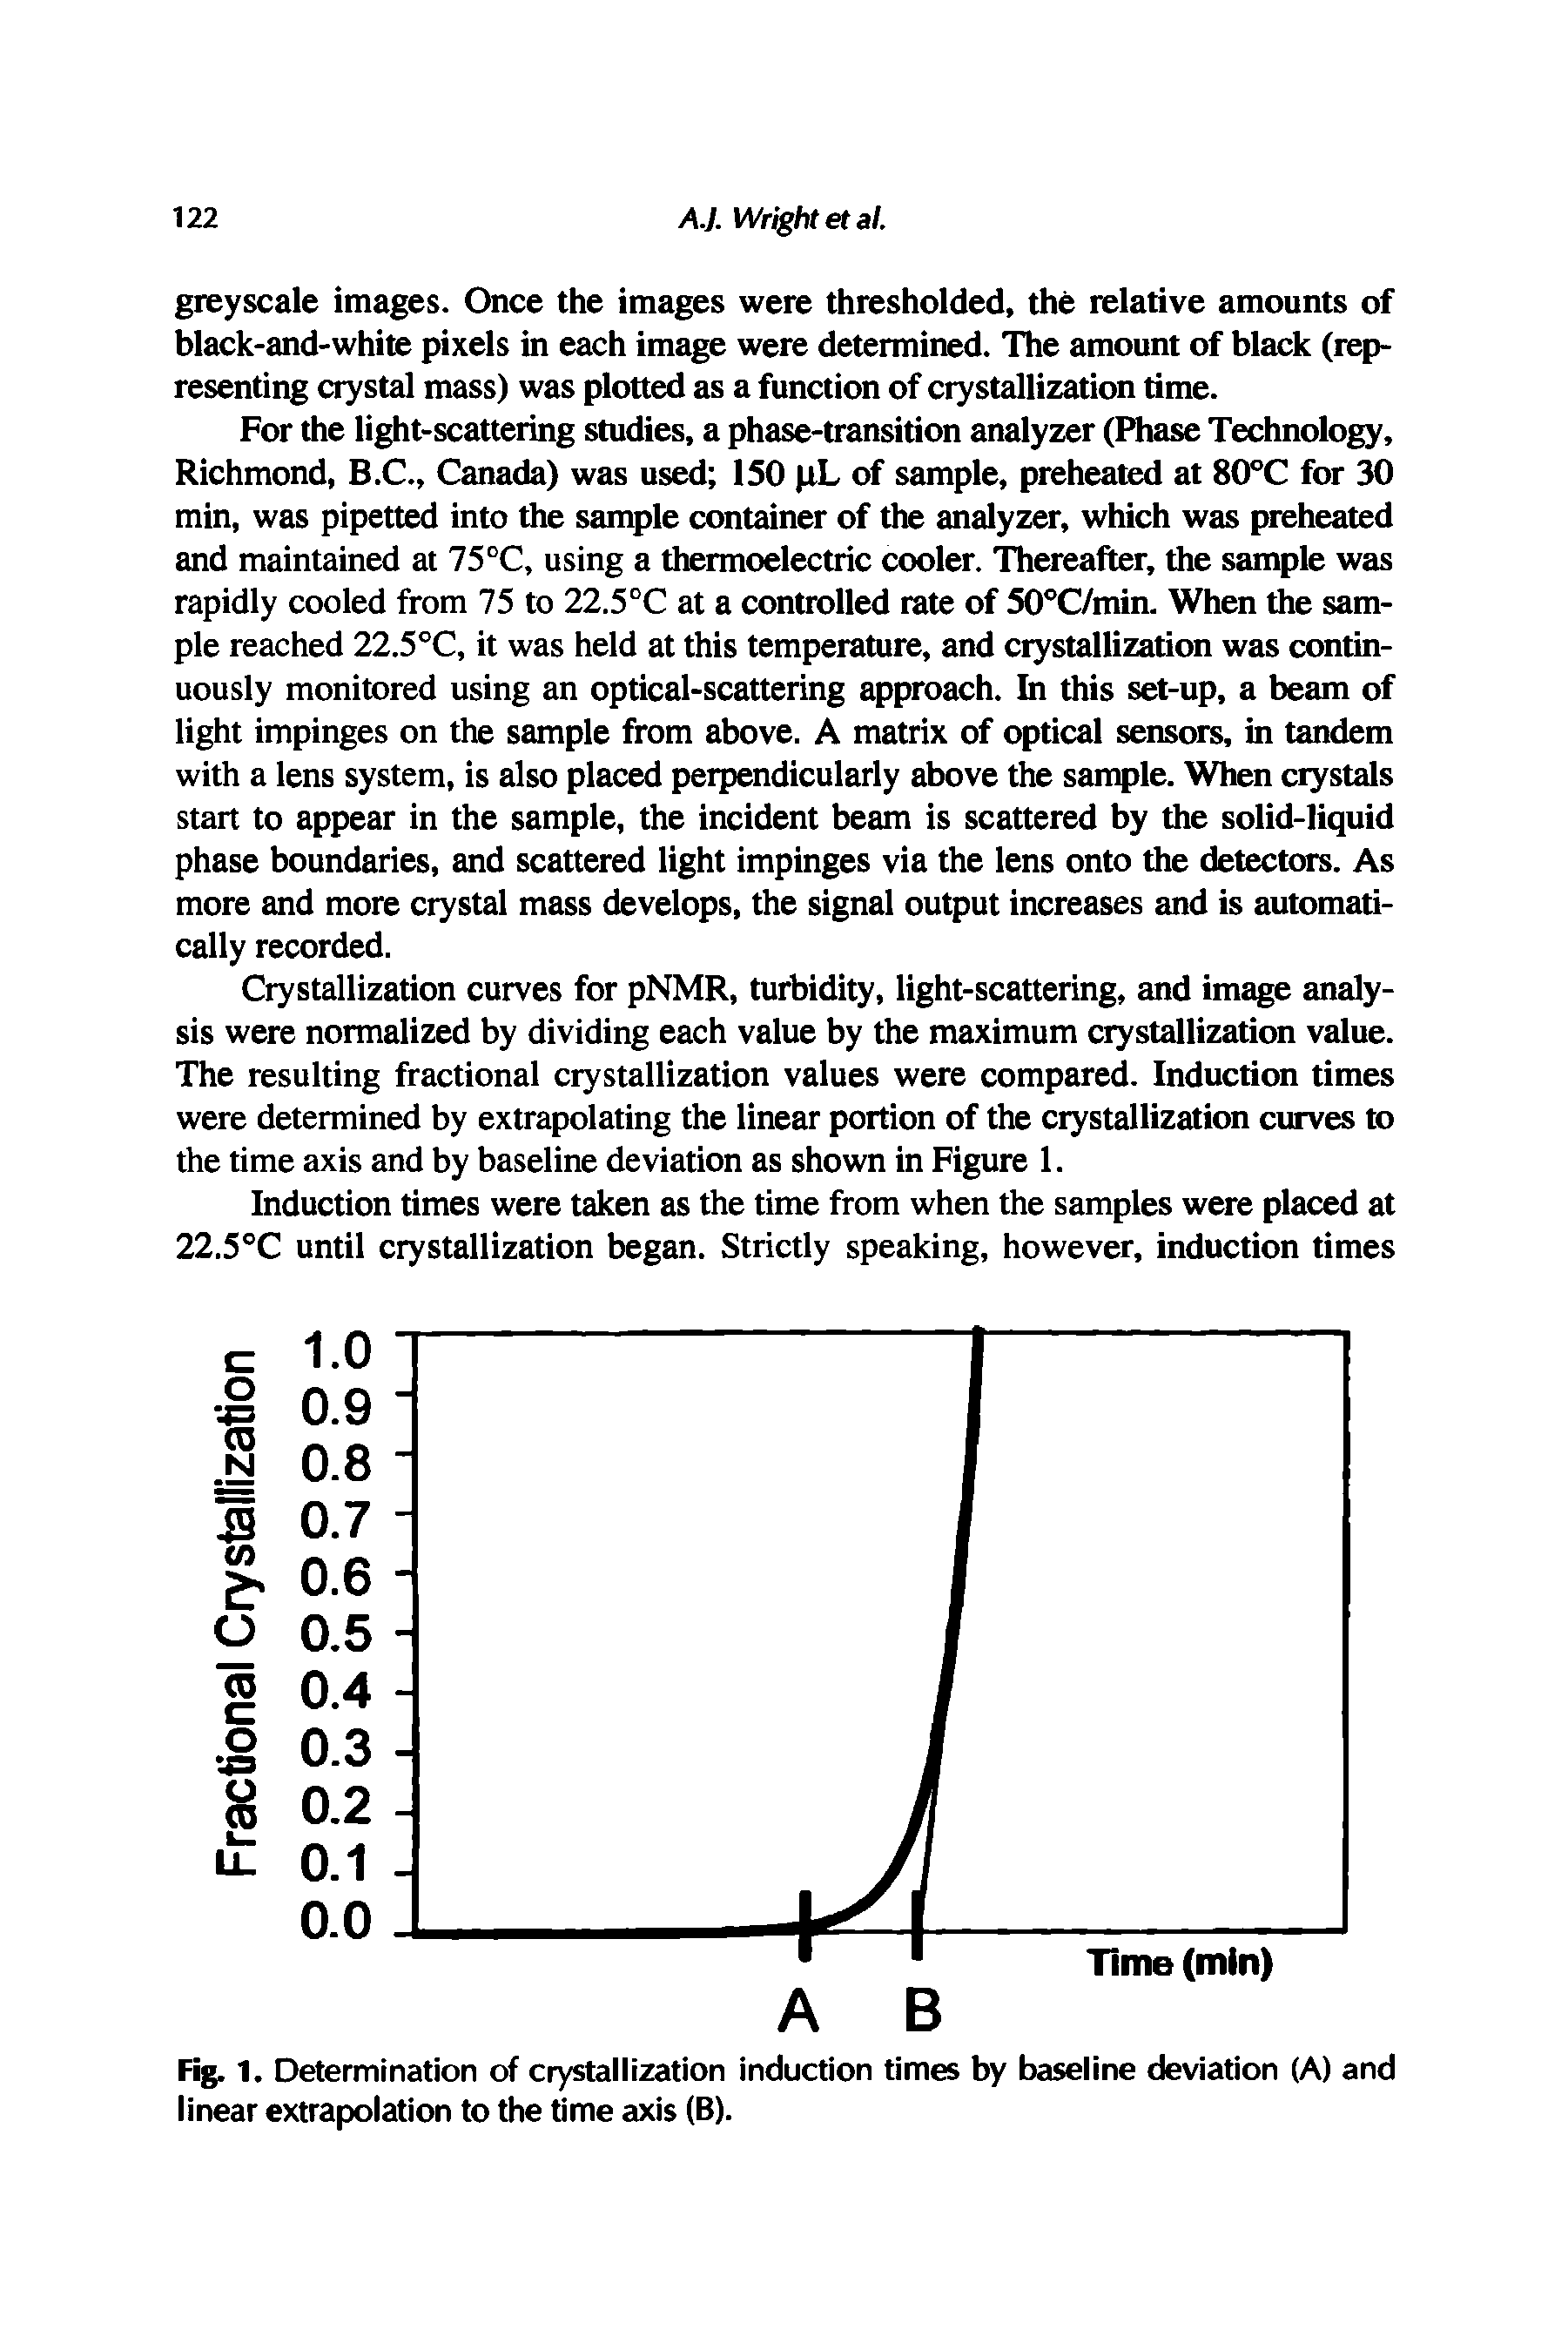 Fig.1. Determination of crystallization induction times by baseline deviation (A) and linear extrapolation to the time axis (B).